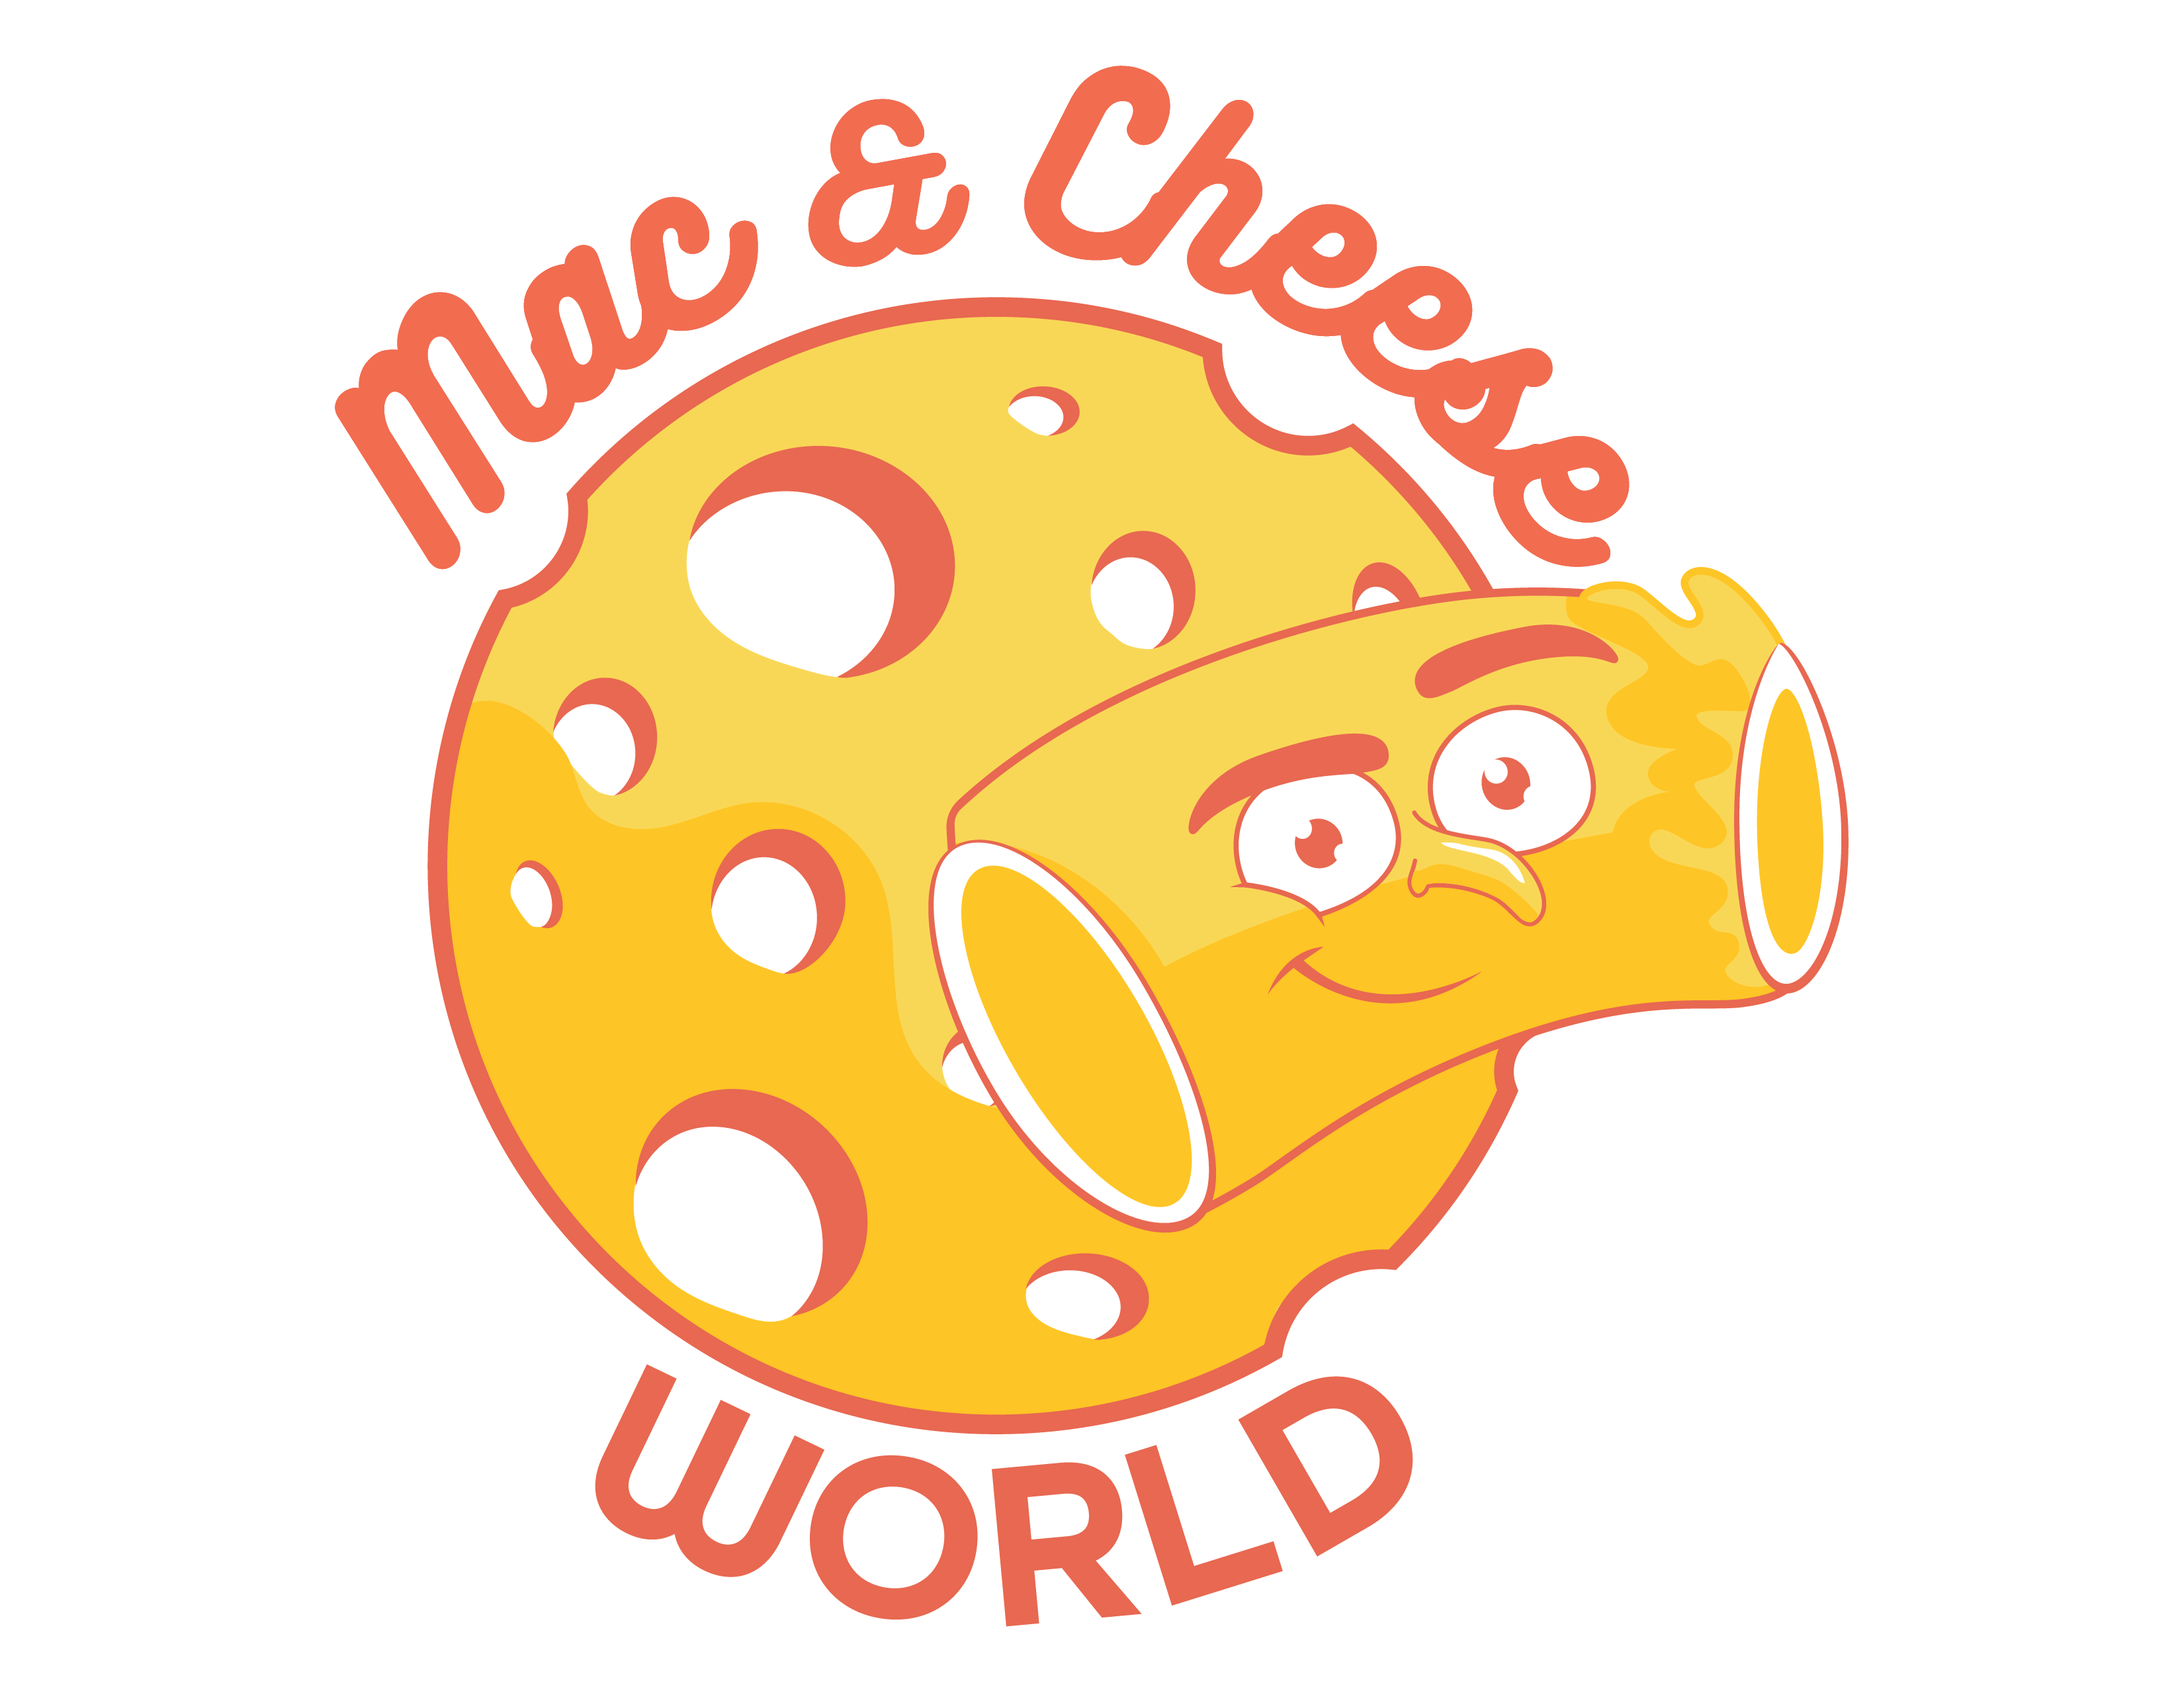 mac-and-cheese-world-logo-transparent.png